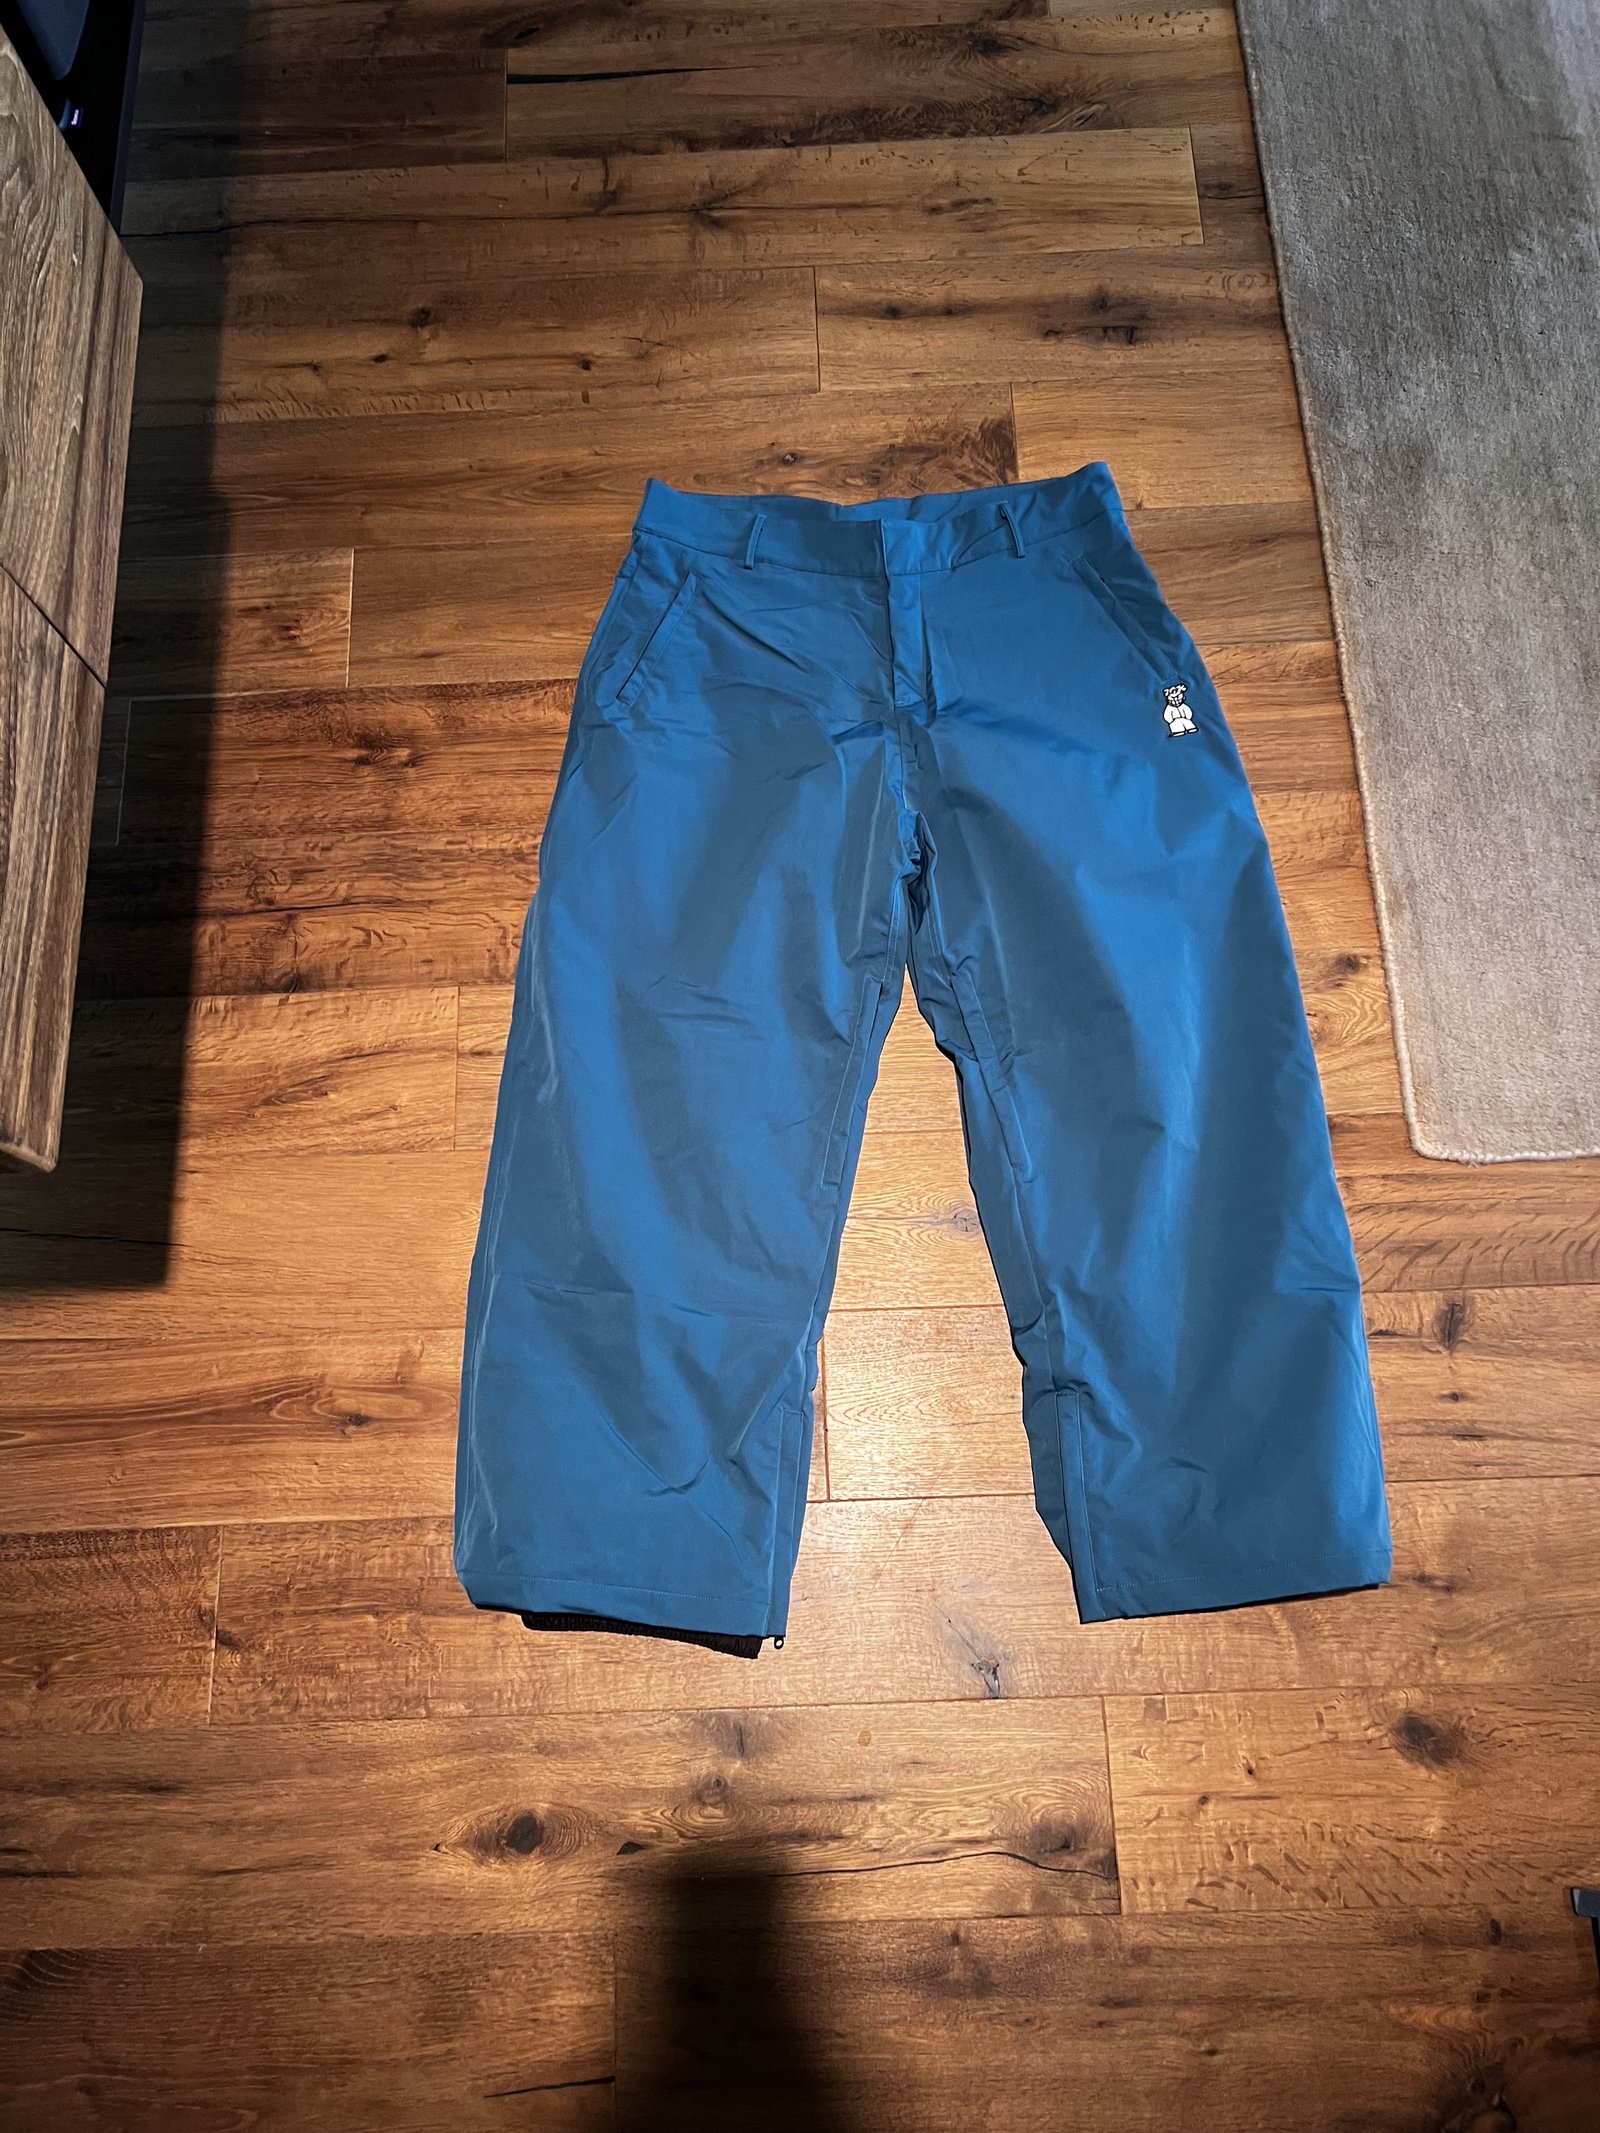 2022 Shitkid Harlaut Pants Size L (Teal)